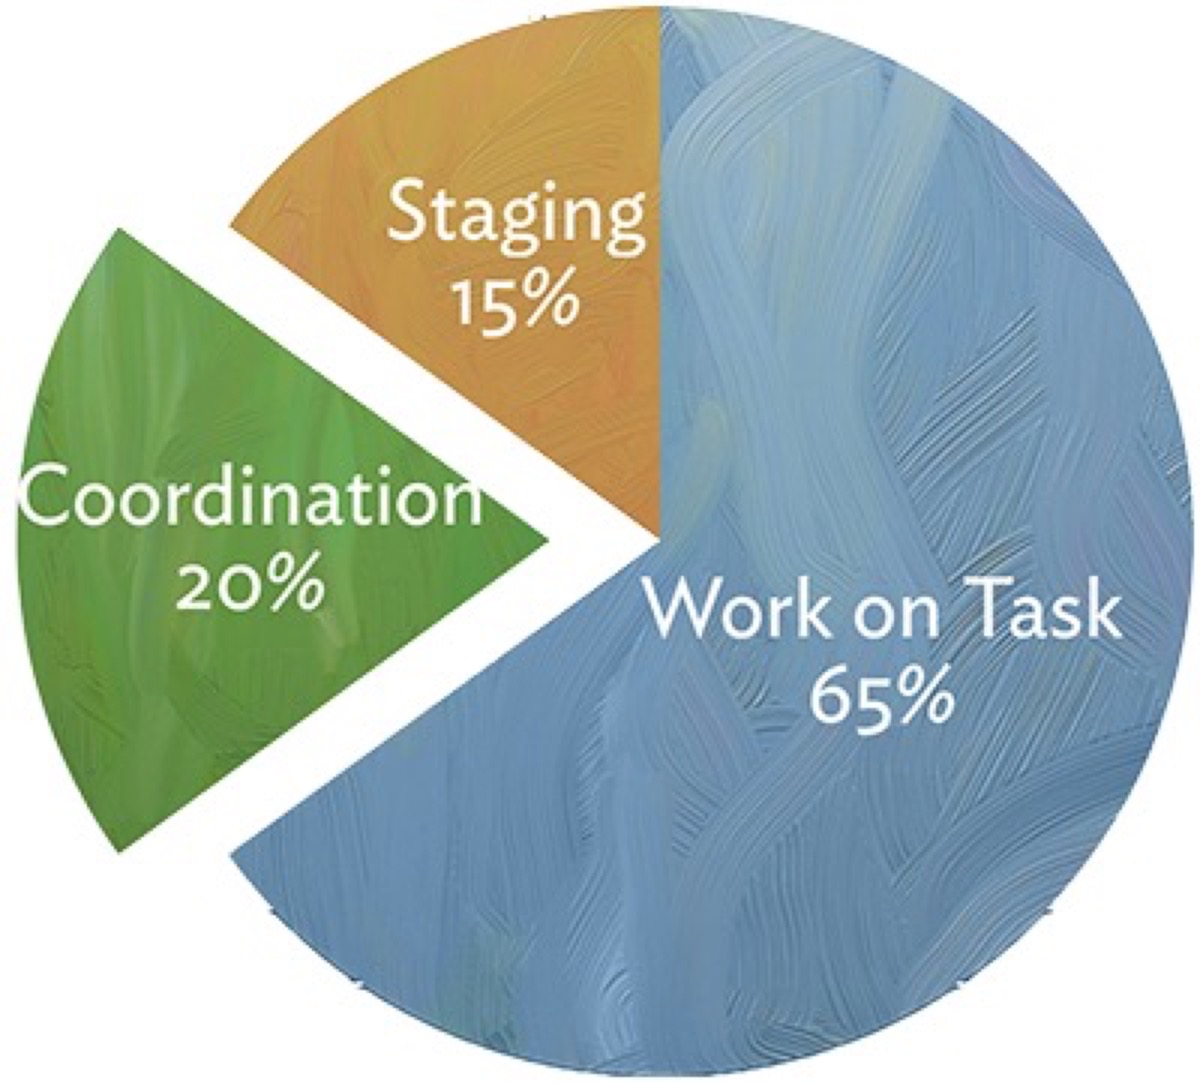 Chart of time spent on coordination tasks